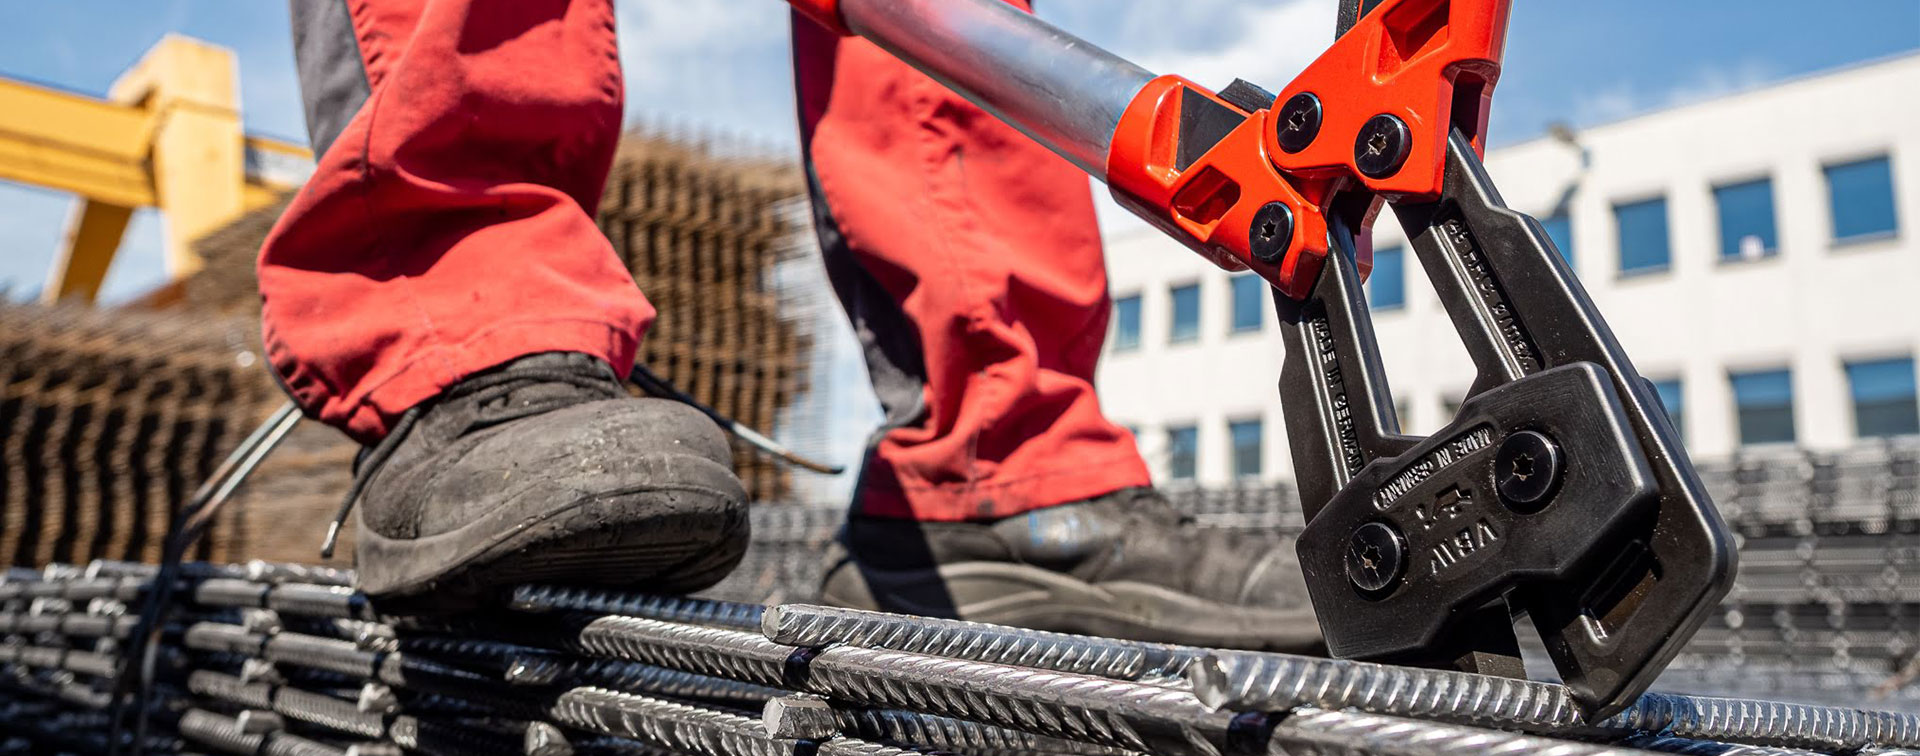 Bolt cutter in use in the construction industry